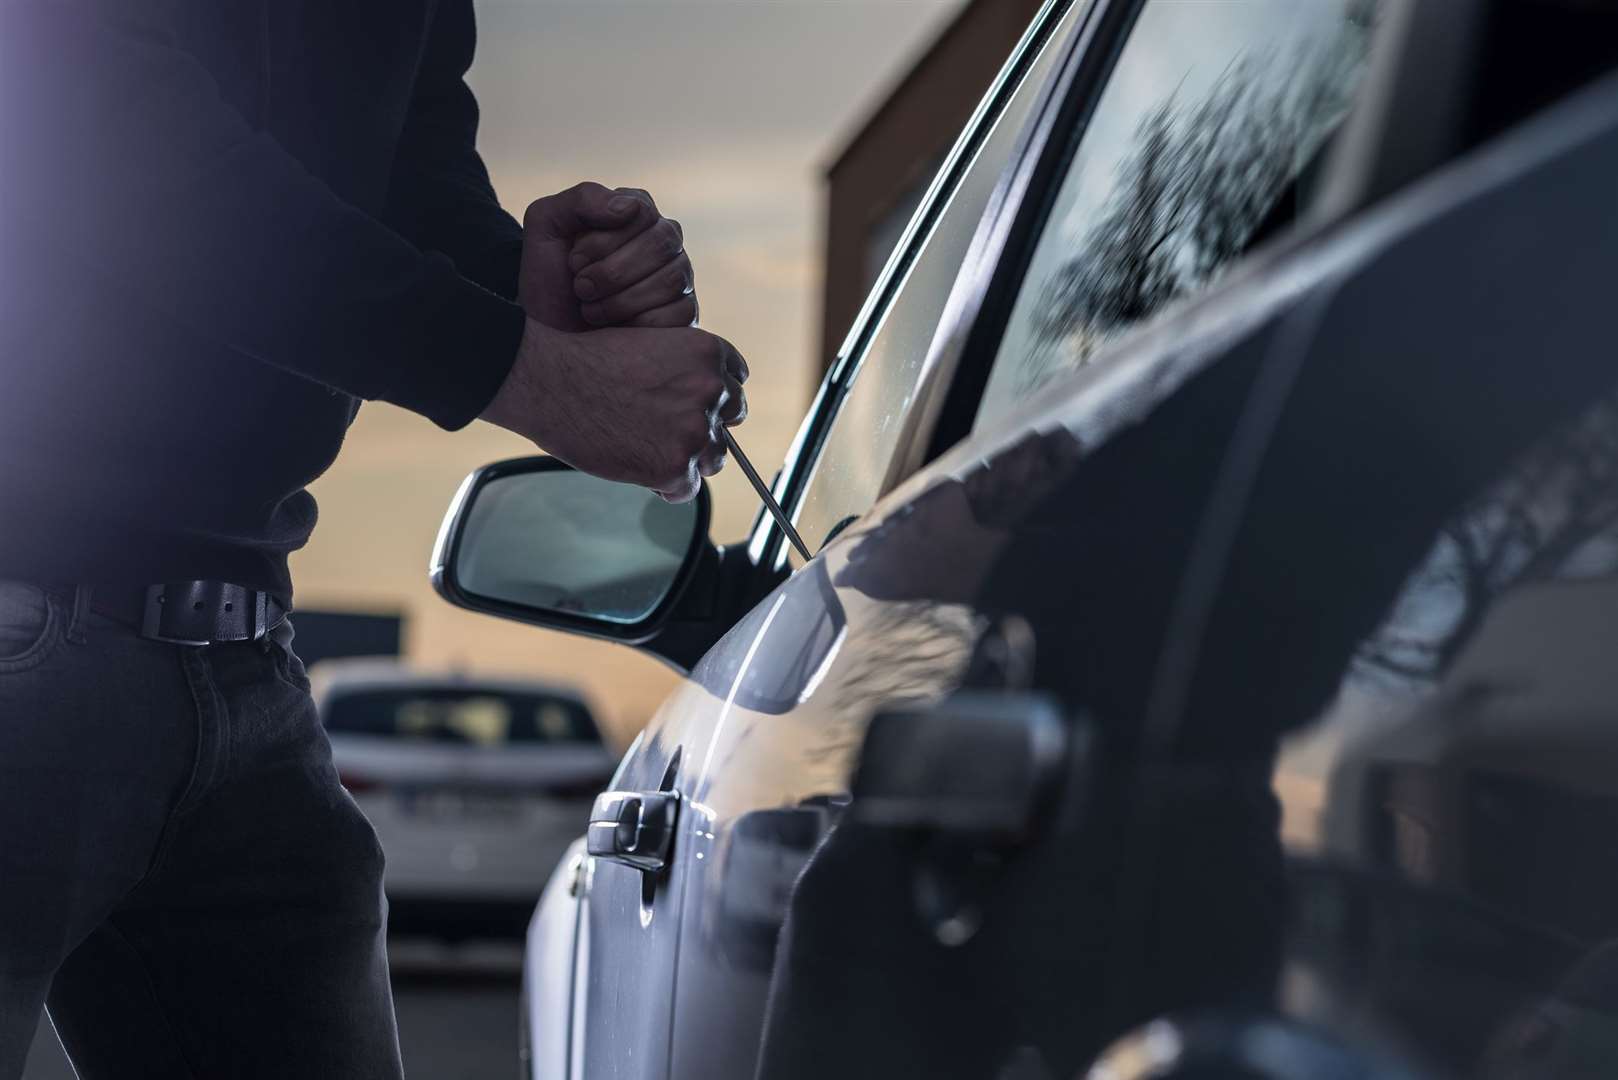 The cost of living crisis, says the AA, may turn more people towards theft. Image: Stock photo.